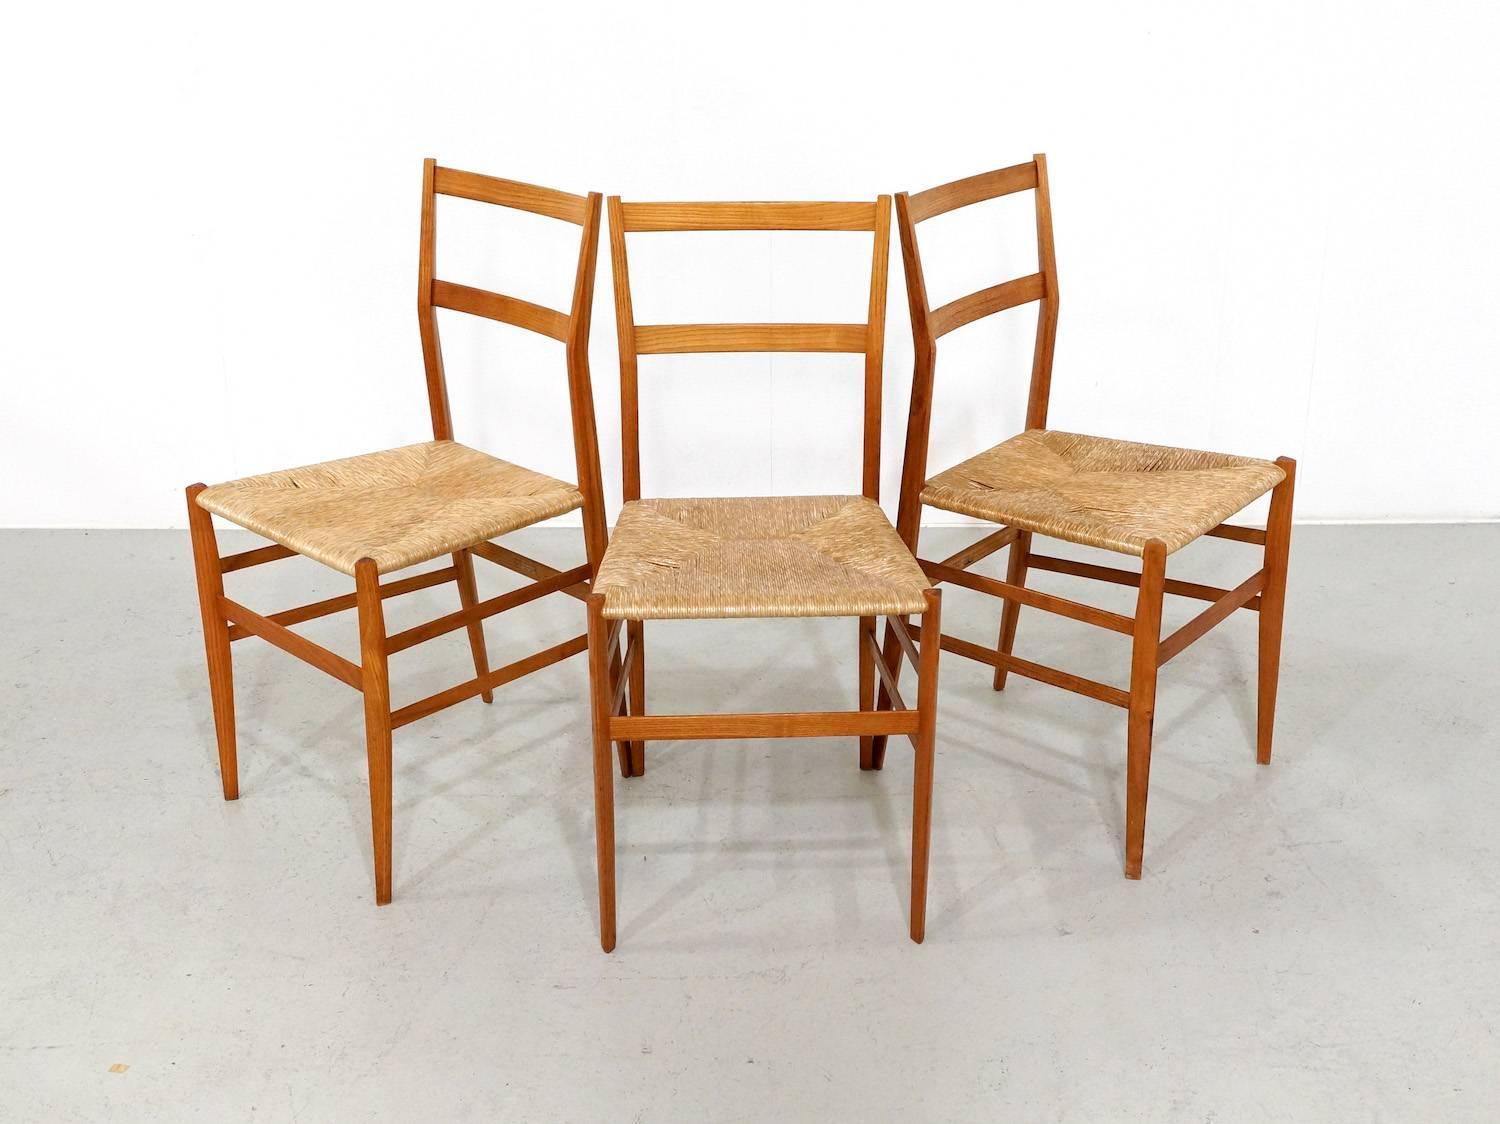 Great set of three Gio Ponti most Famous Superleggera in an early 1950s edition from Figli Di Amedeo Cassina. This set of three chairs are made in ashwood and in great vintage condition. The seats are in original condition and the wood has a